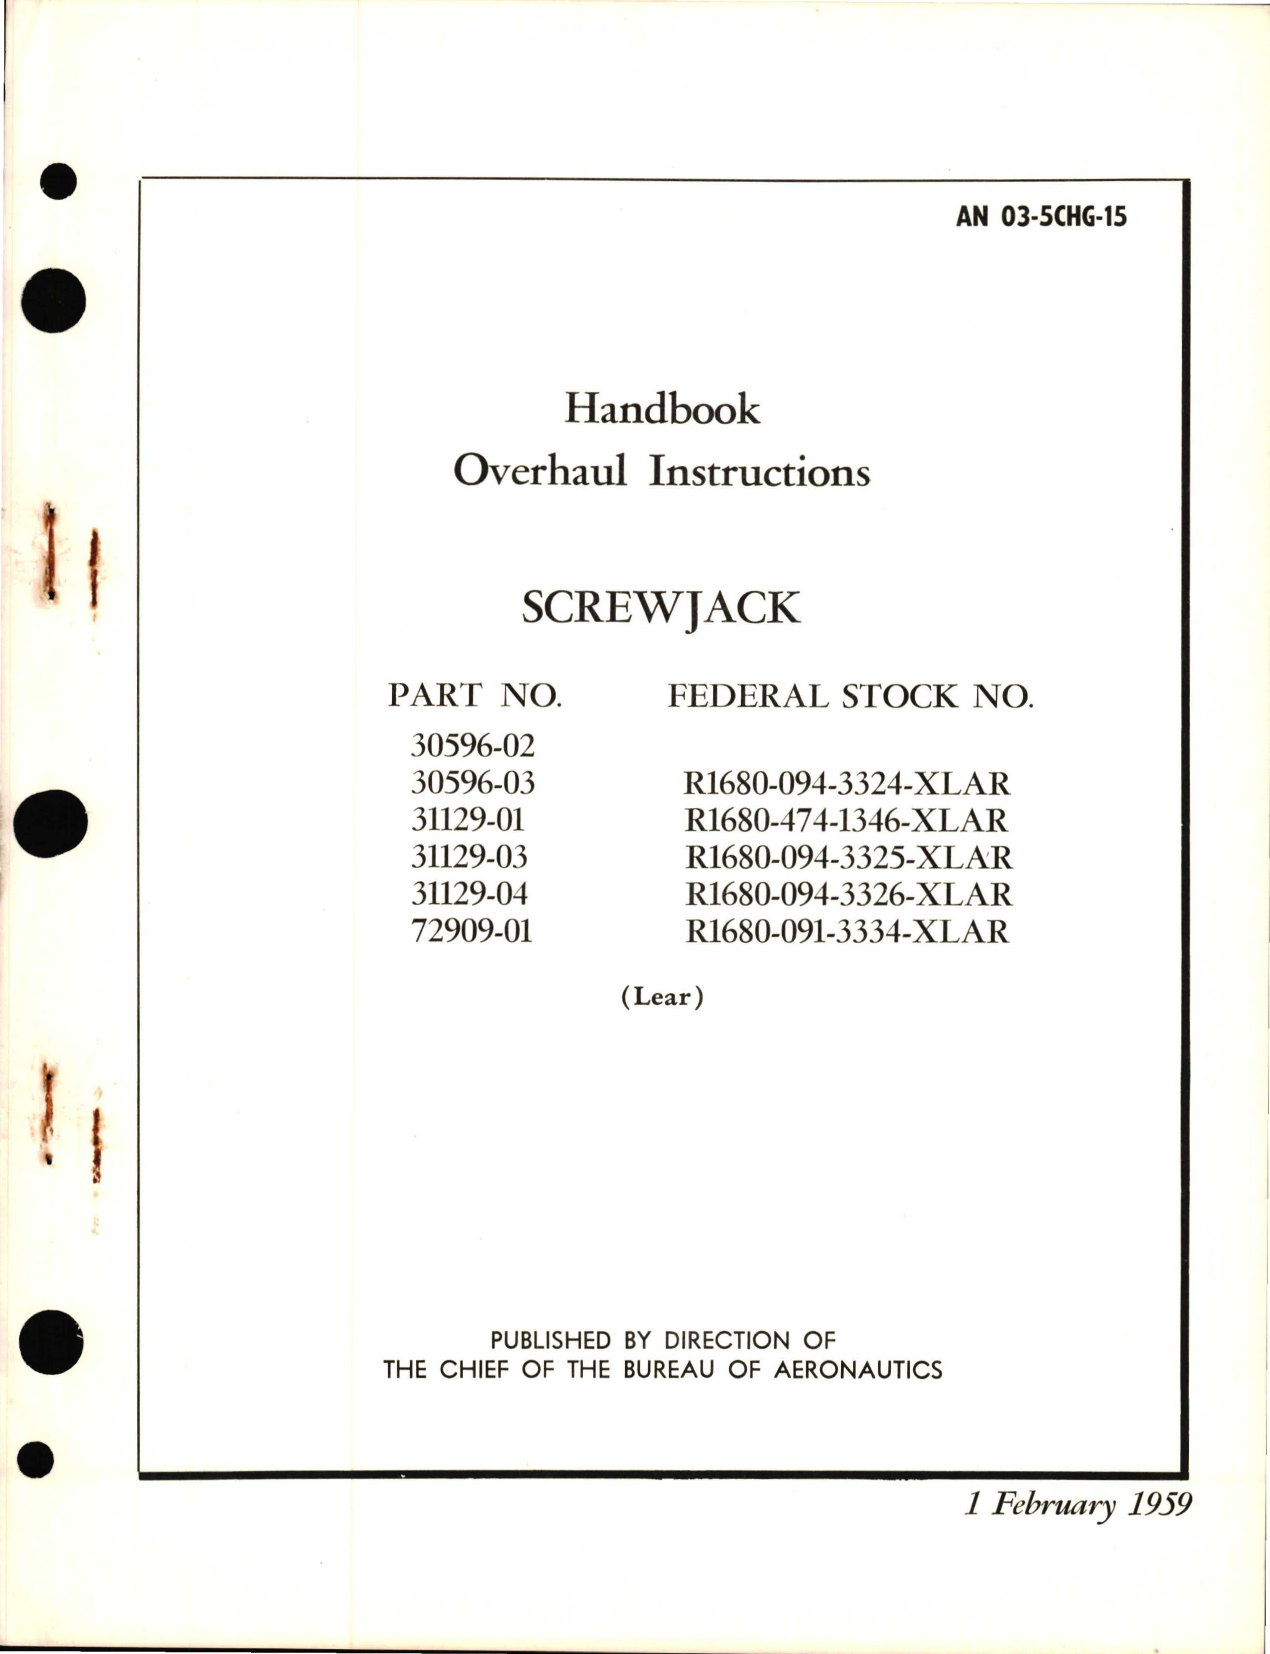 Sample page 1 from AirCorps Library document: Overhaul Instructions for Screwjack, Parts 30596-02, 30596-03, 31129-01, 31129-03, 31129-04, and 72909-01